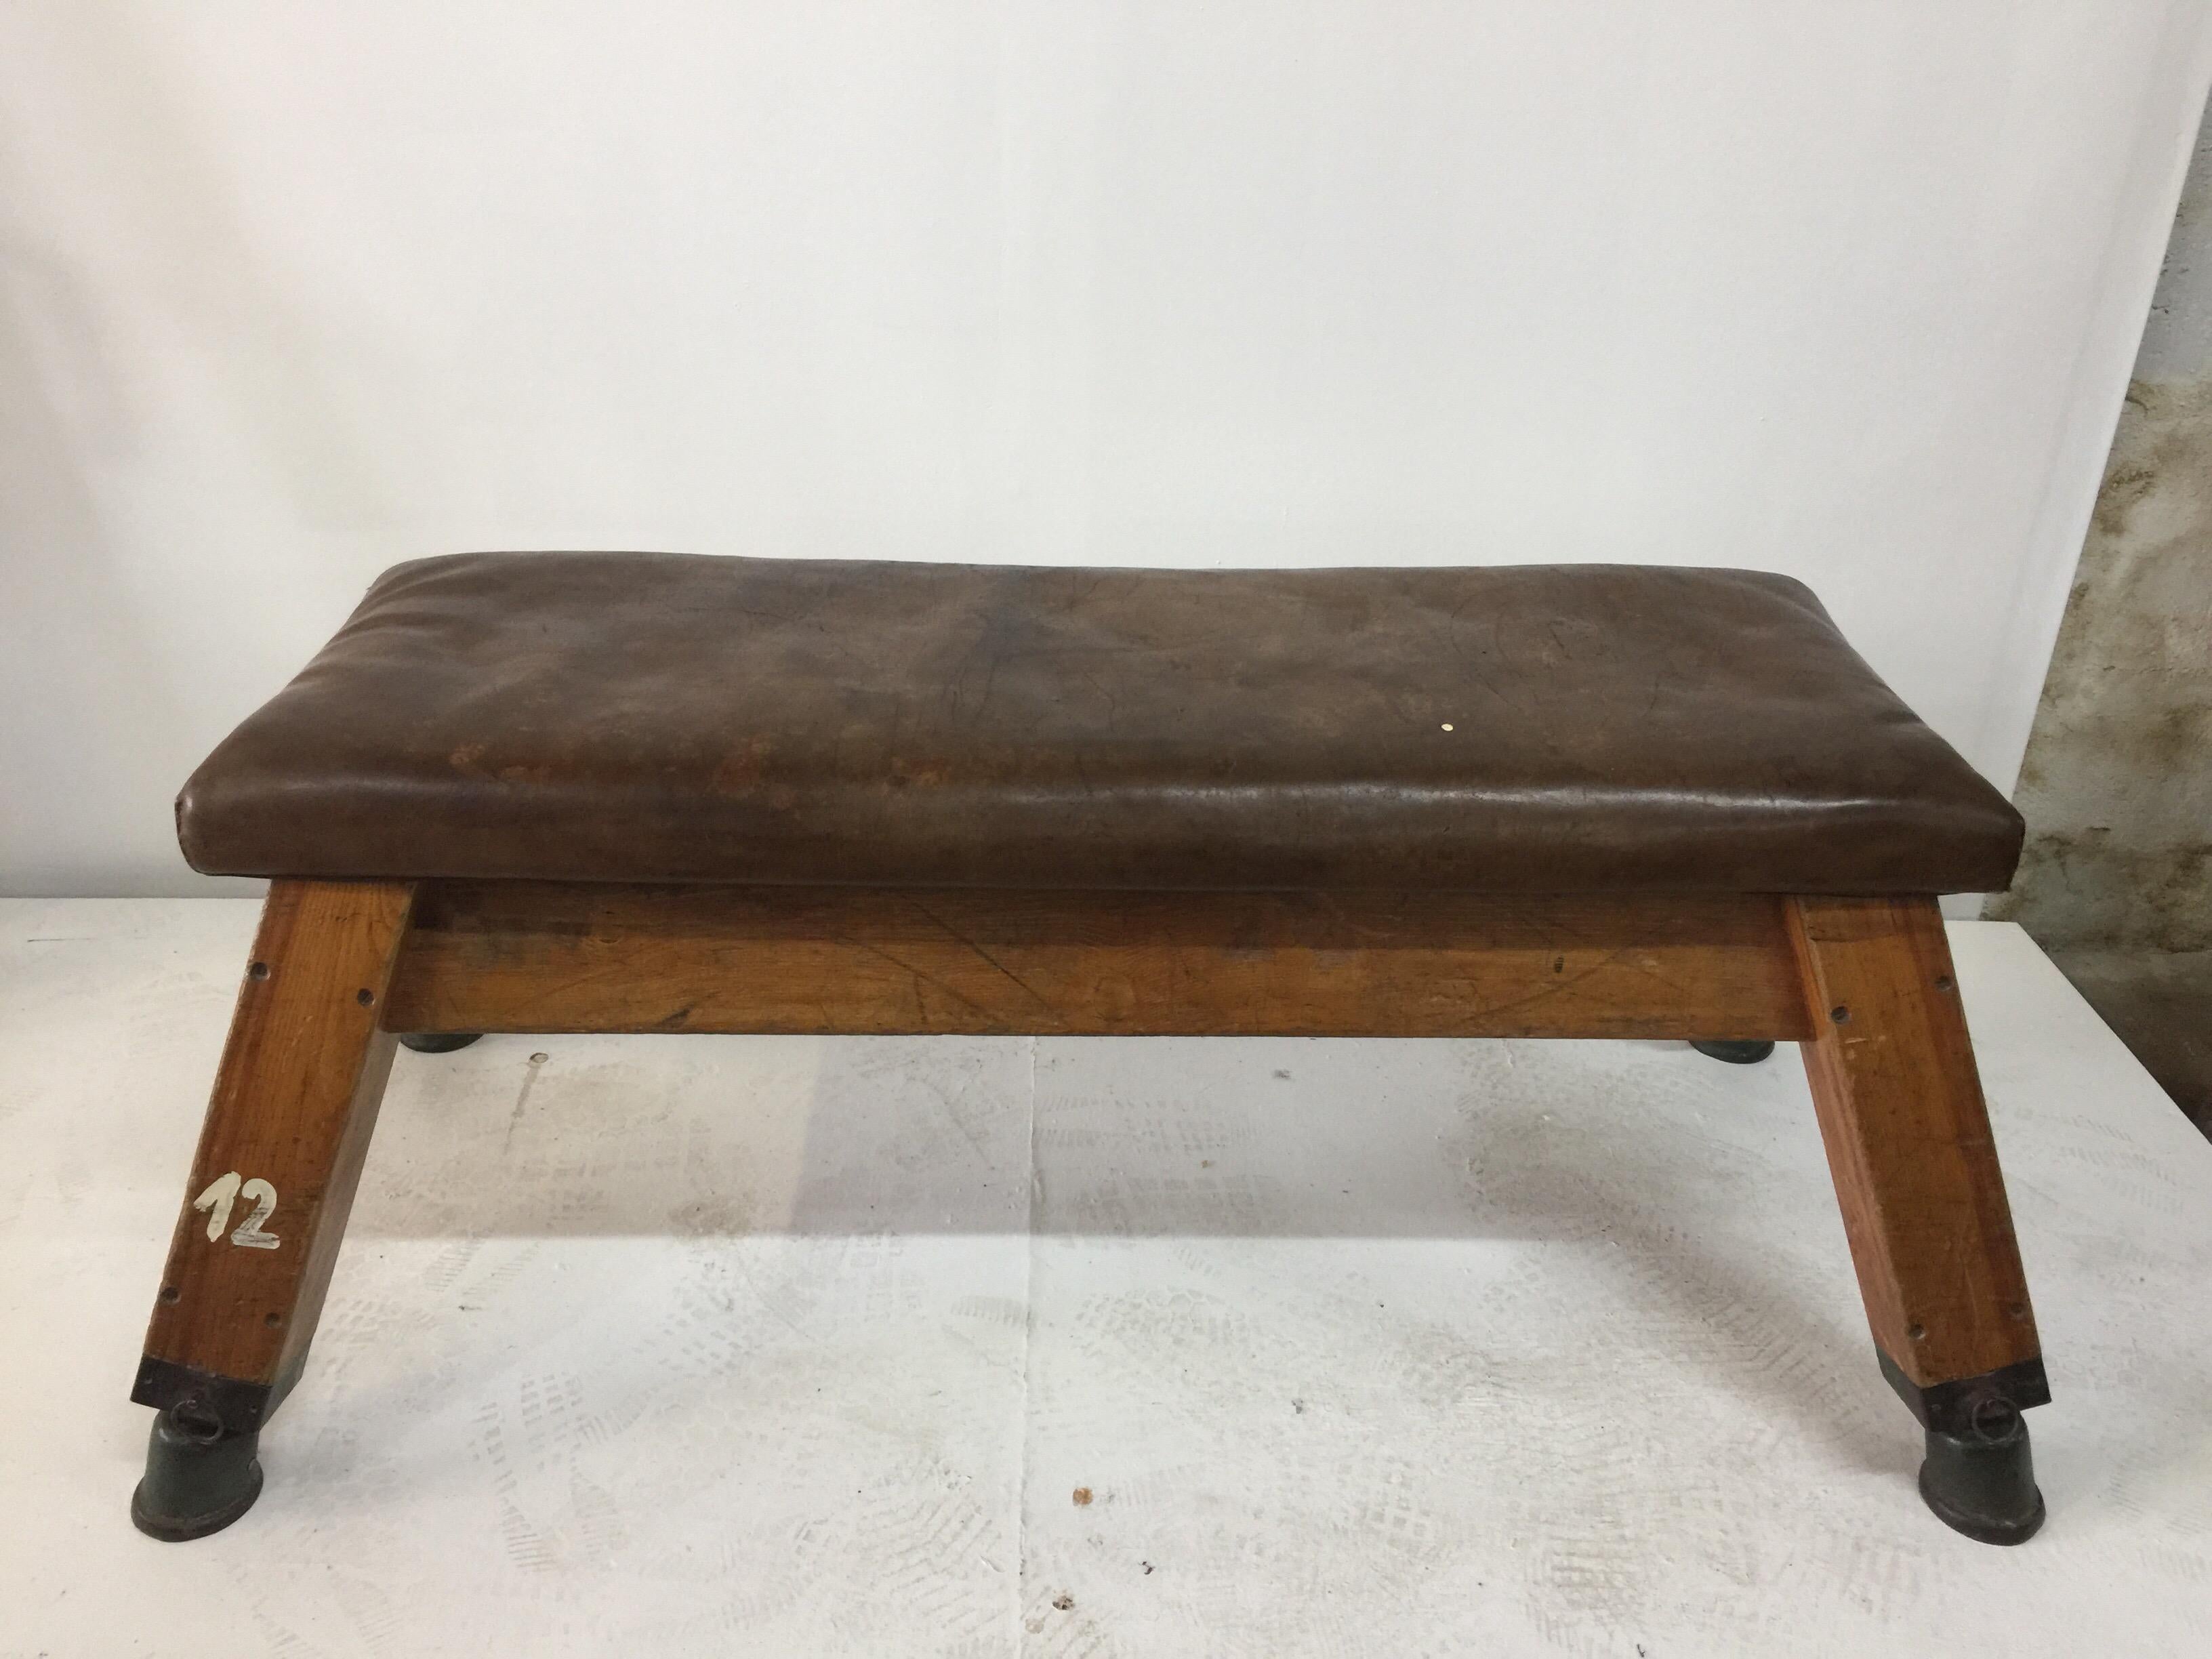 This rare to find European gym bench or table has a thick, worn brown leather top with lots of wear and beauty. Strong and solid! circa 1940s.

Dimensions of leather top only: 52 inches wide, 19 inches deep.